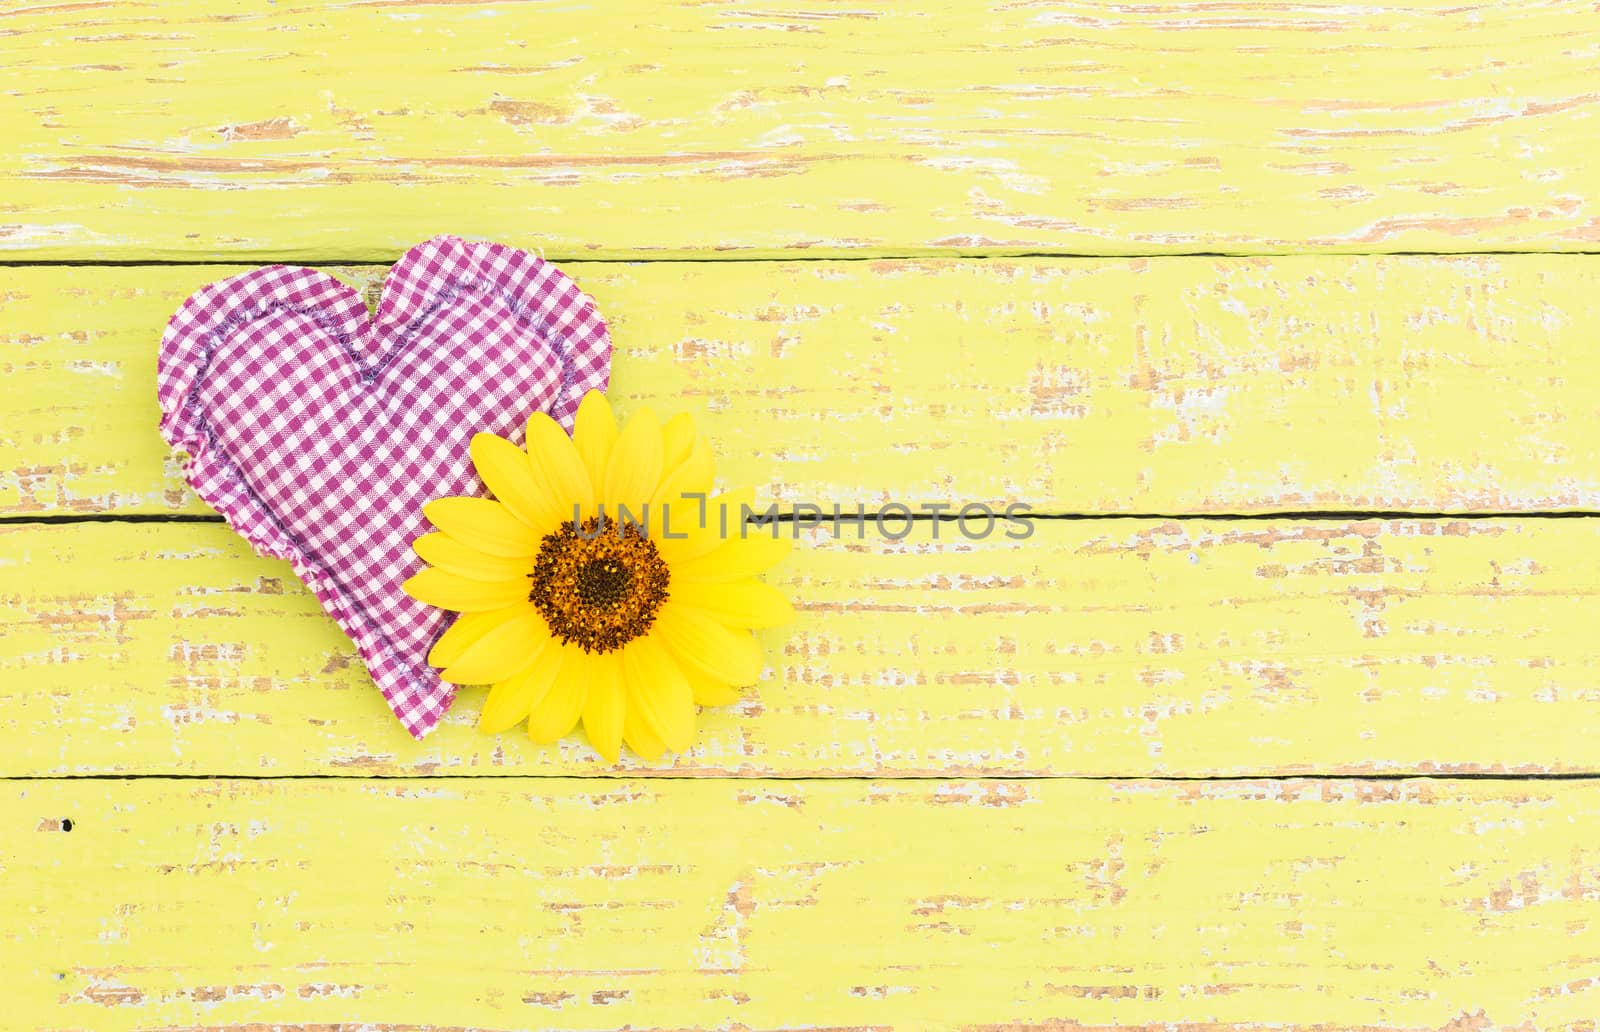 Greeting card with heart and flower decoration by Vulcano